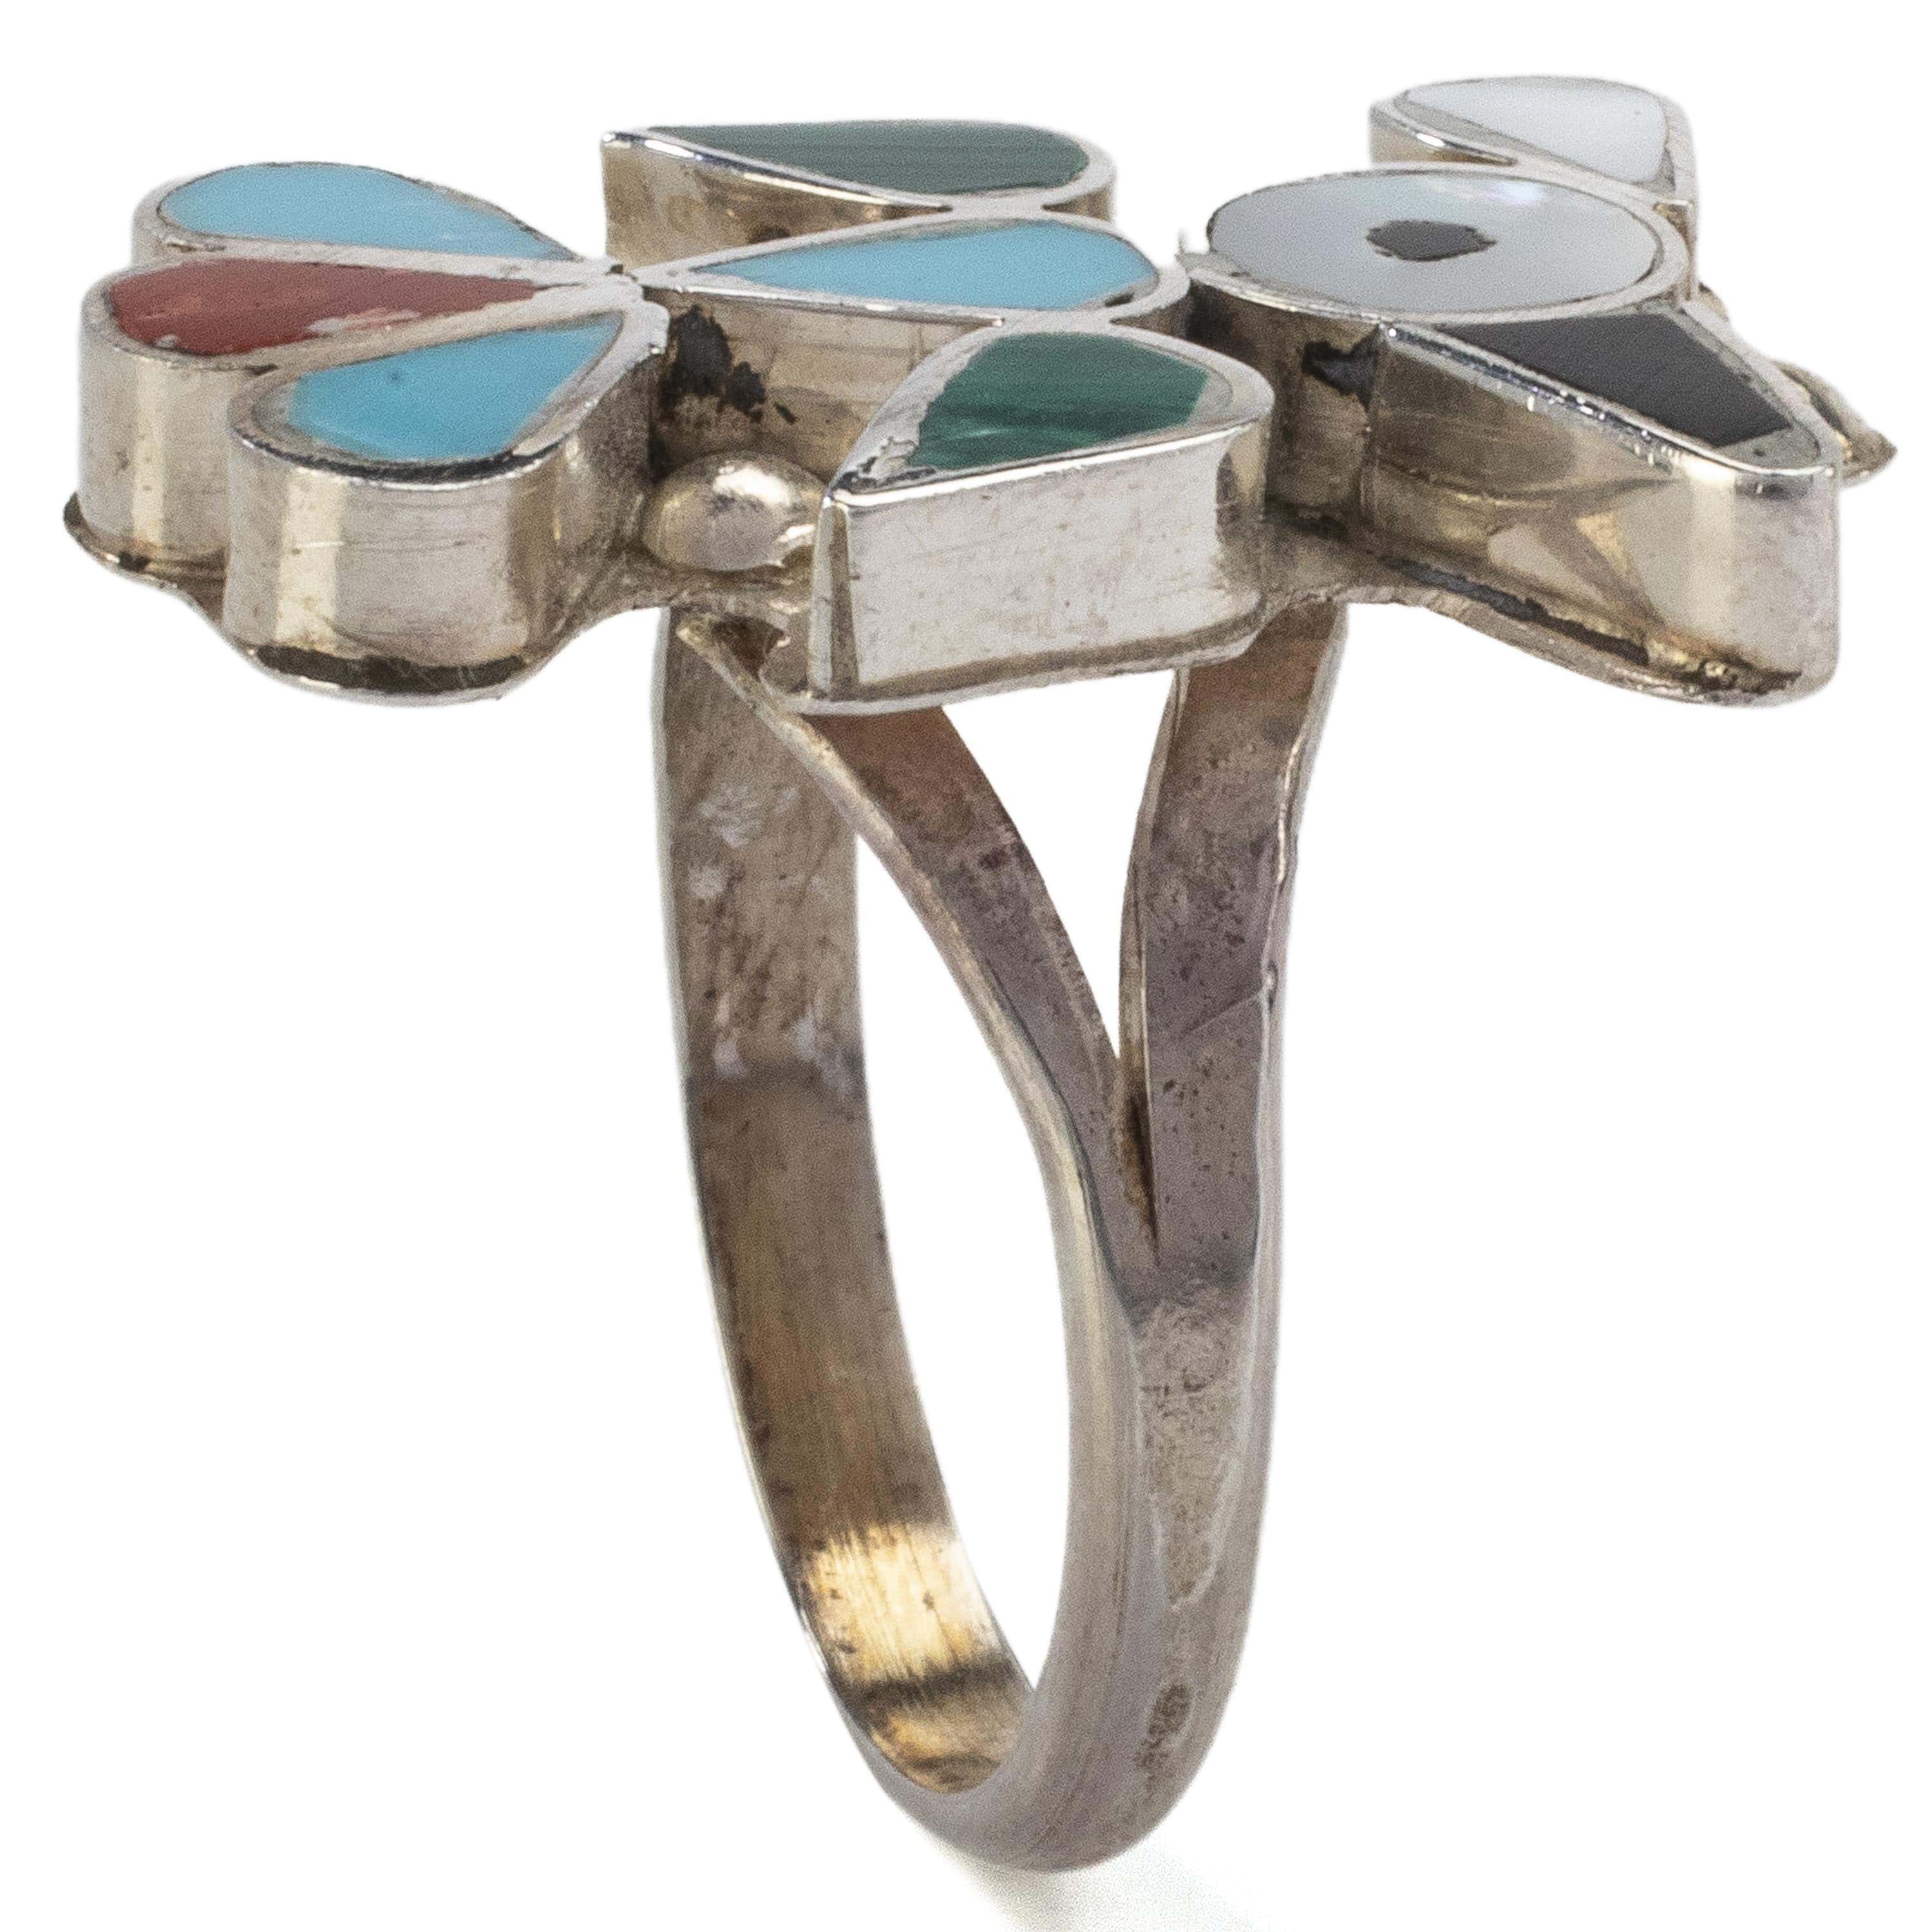 Kalifano Native American Jewelry 5.5 Pino Yunie Zuni Peyote Bird with Mother of Pearl, Black Onyx, Coral, Malachite, and Turquoise USA Native American Made 925 Sterling Silver Ring NAR200.024.55